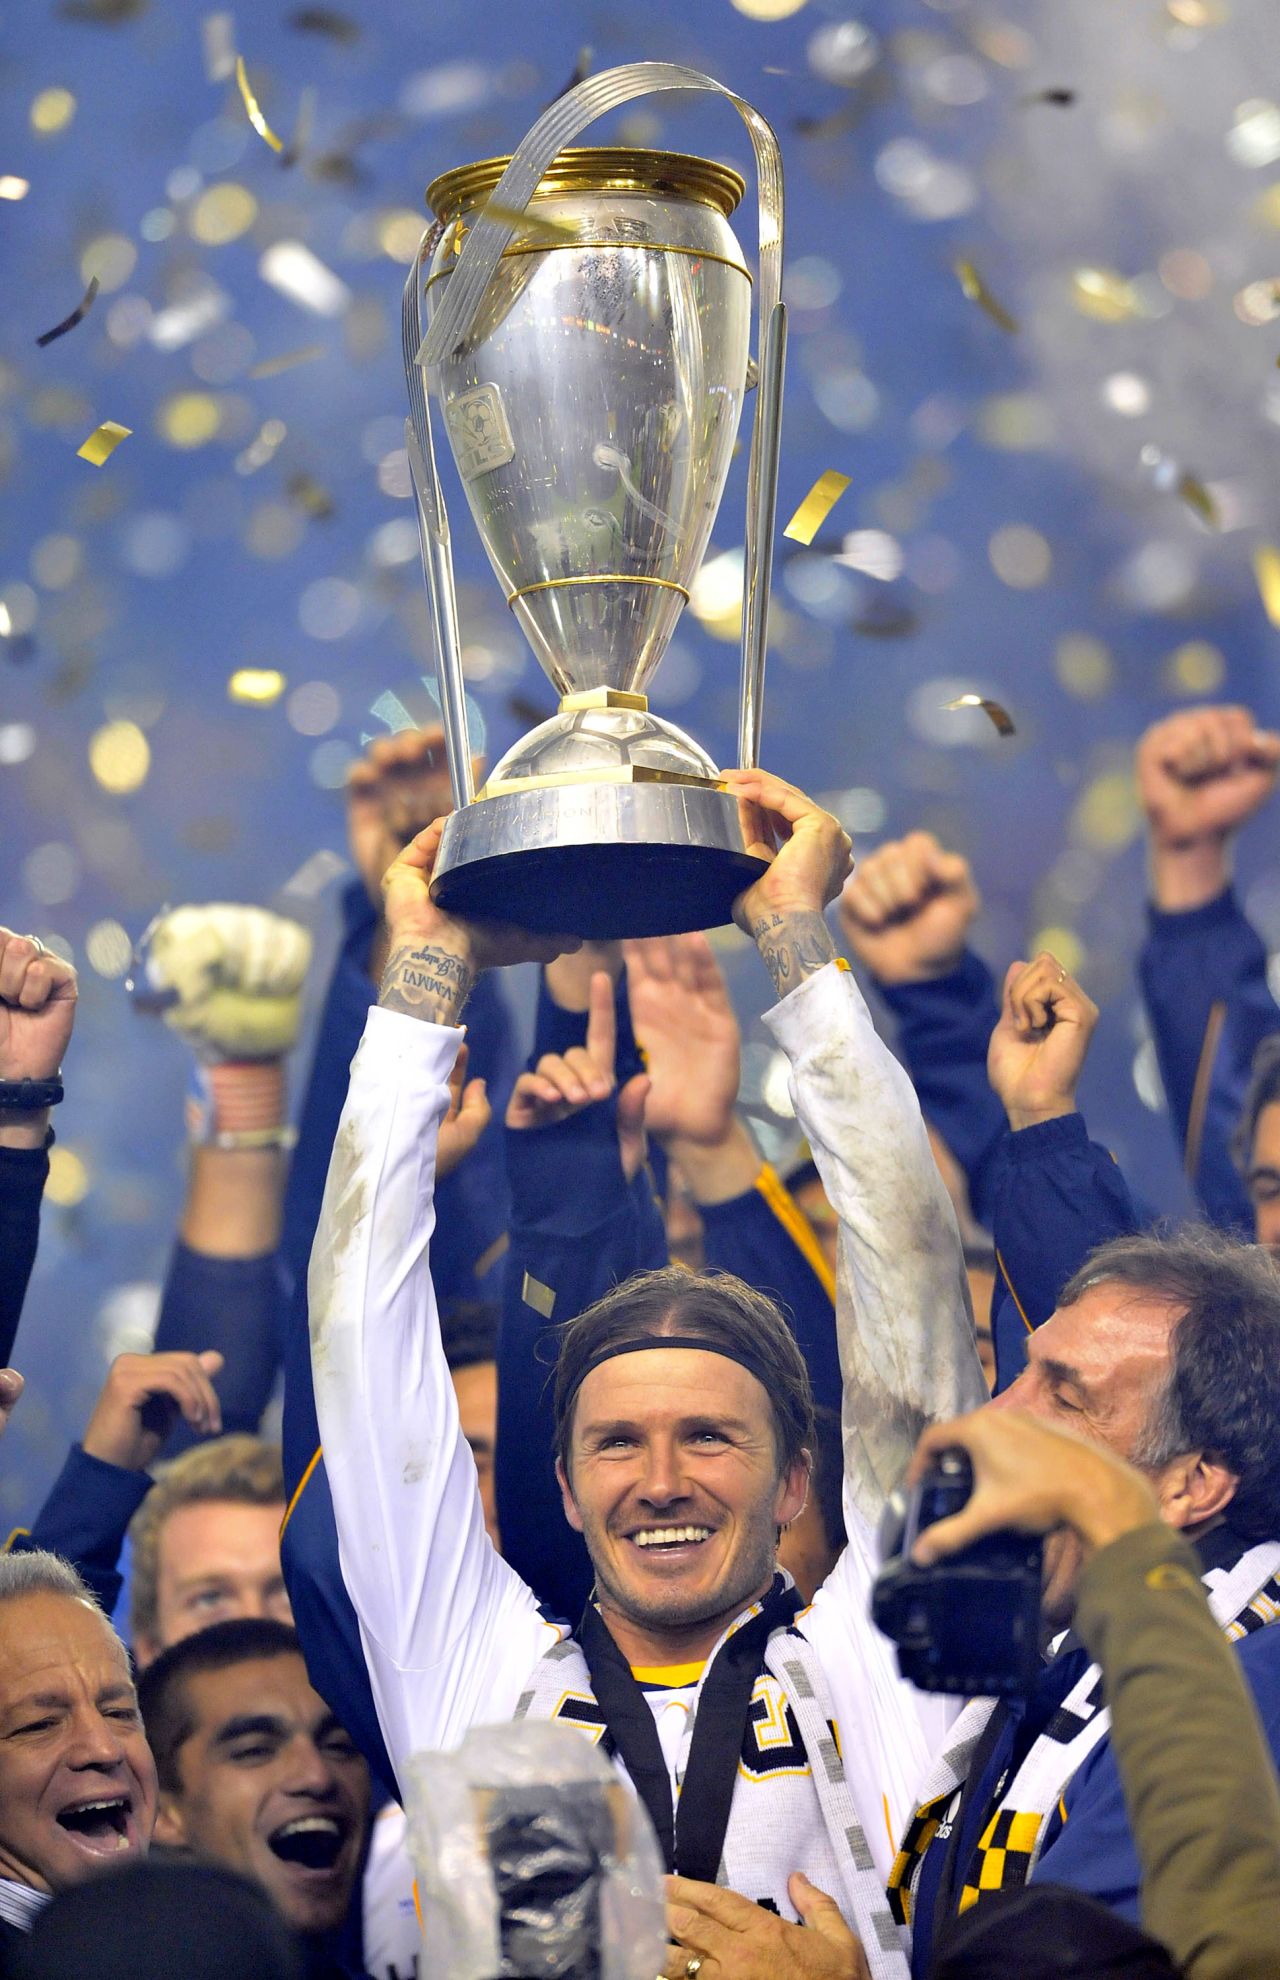 Four years after heading to the States, Beckham finally won the MLS Cup with Galaxy last season. Galaxy beat Houston Dynamo 1-0 in the final thanks to a goal from Landon Donovan.